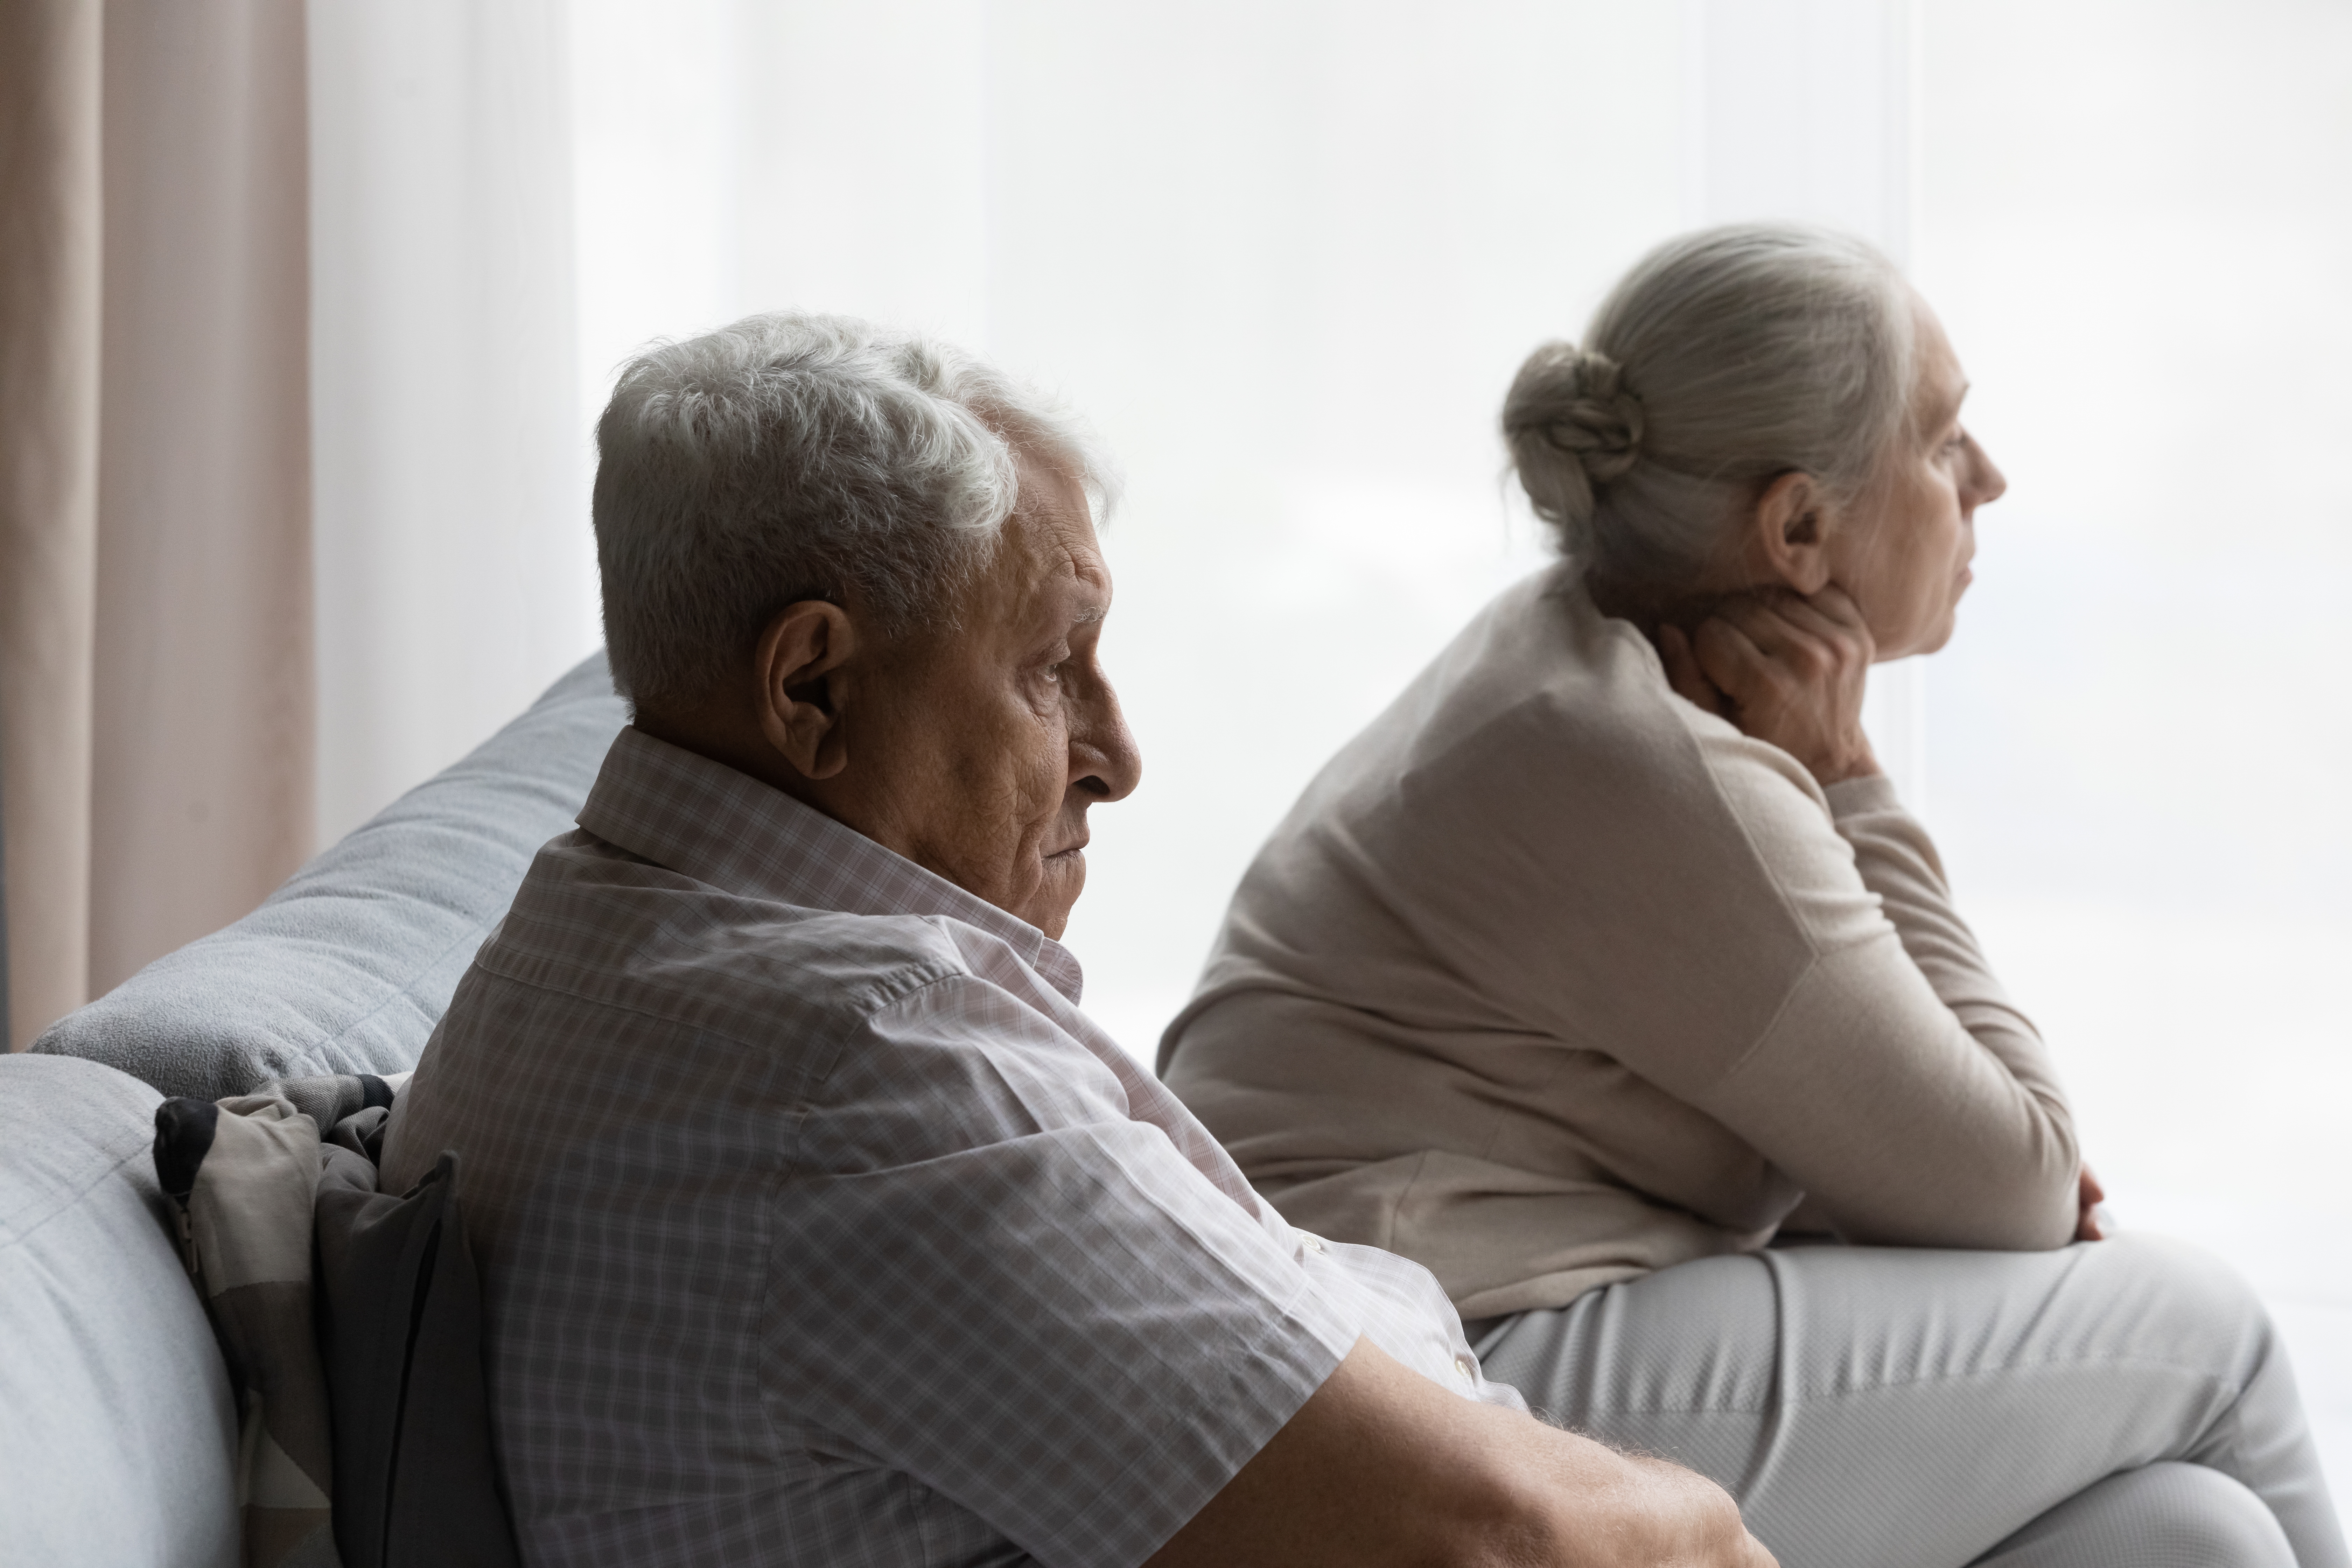 A serious-looking older couple | Source: Shutterstock